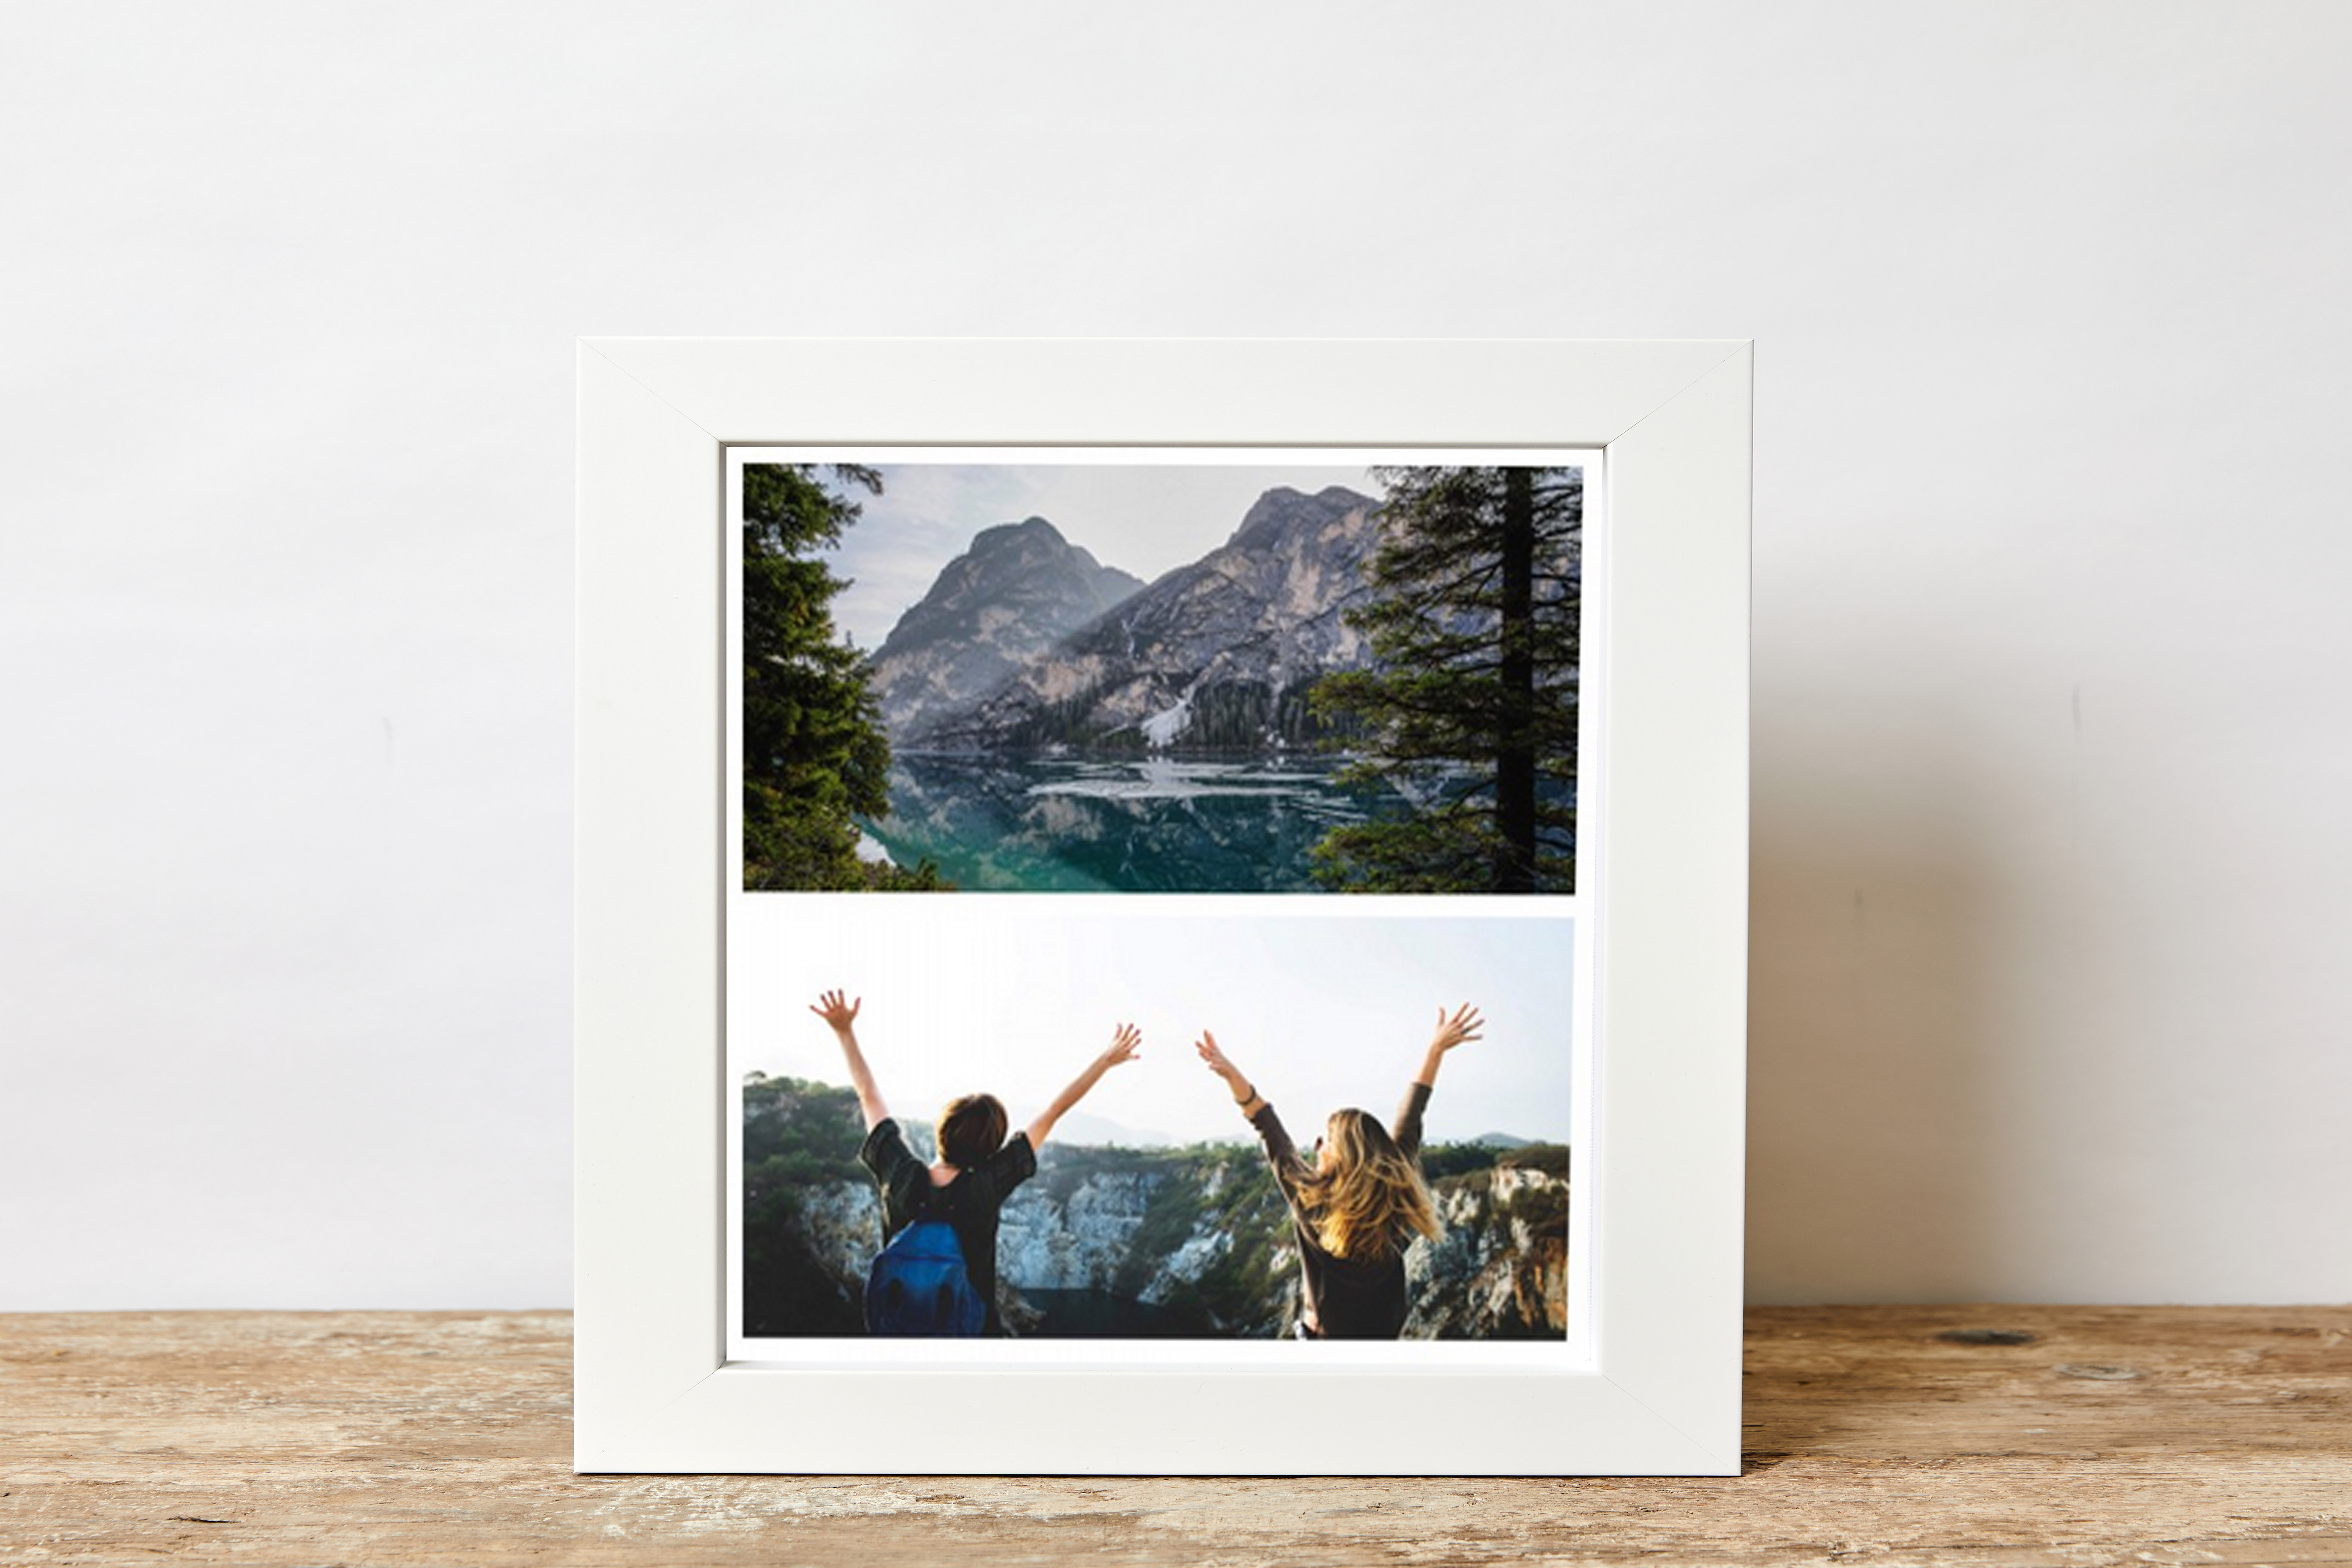 Display your wonderful travel memories and photos inside a personalised collage print and frame it inside our great range of quality picture frames for a touch of luxury